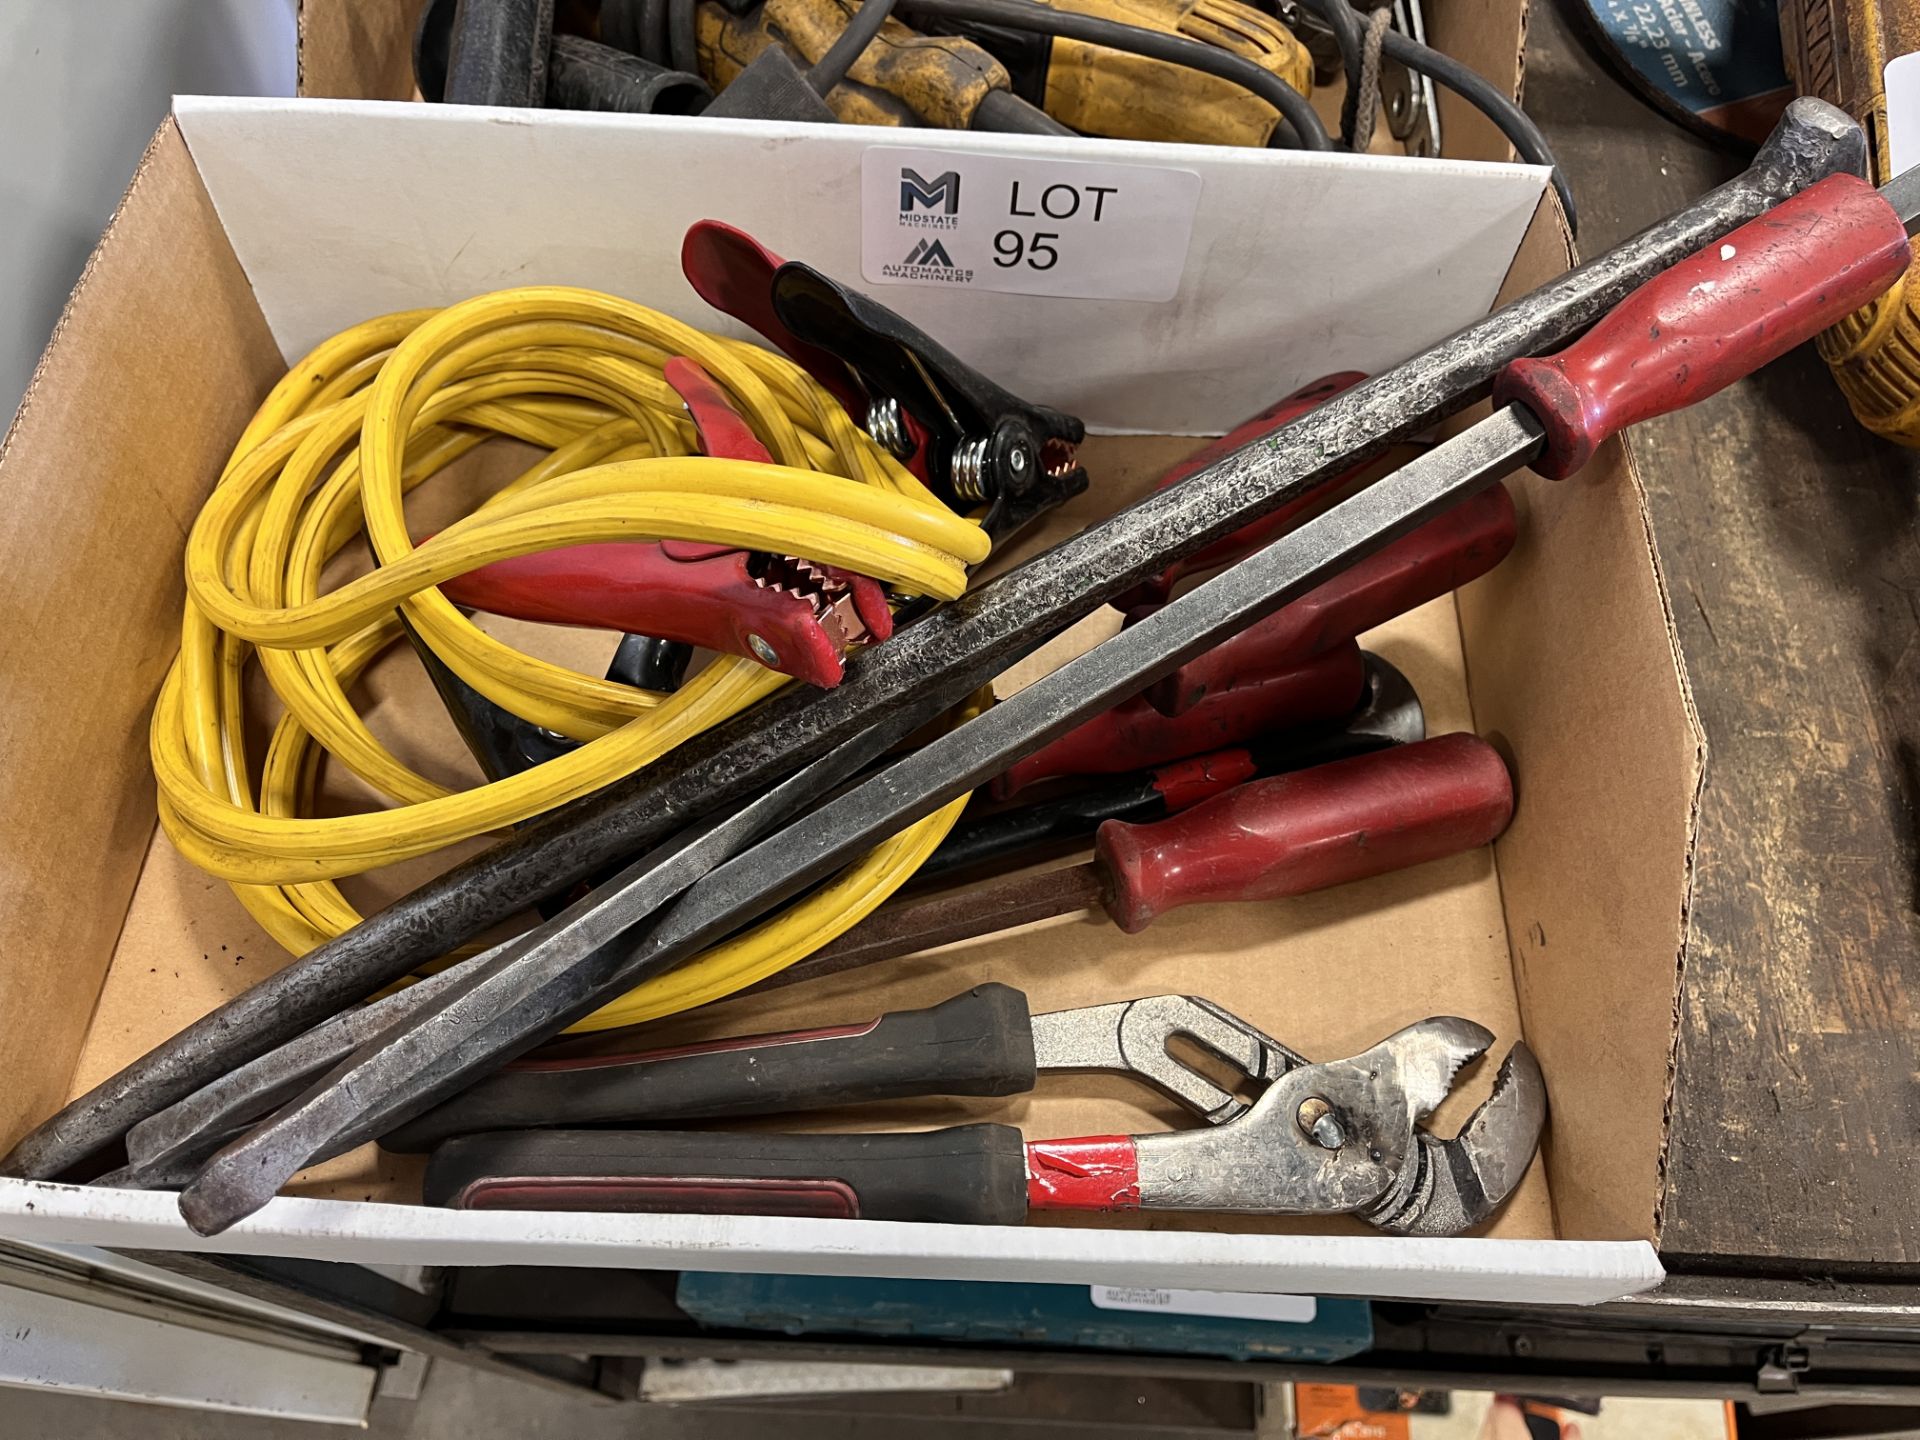 Jumper cables. Misc Hand Tools - Image 2 of 3